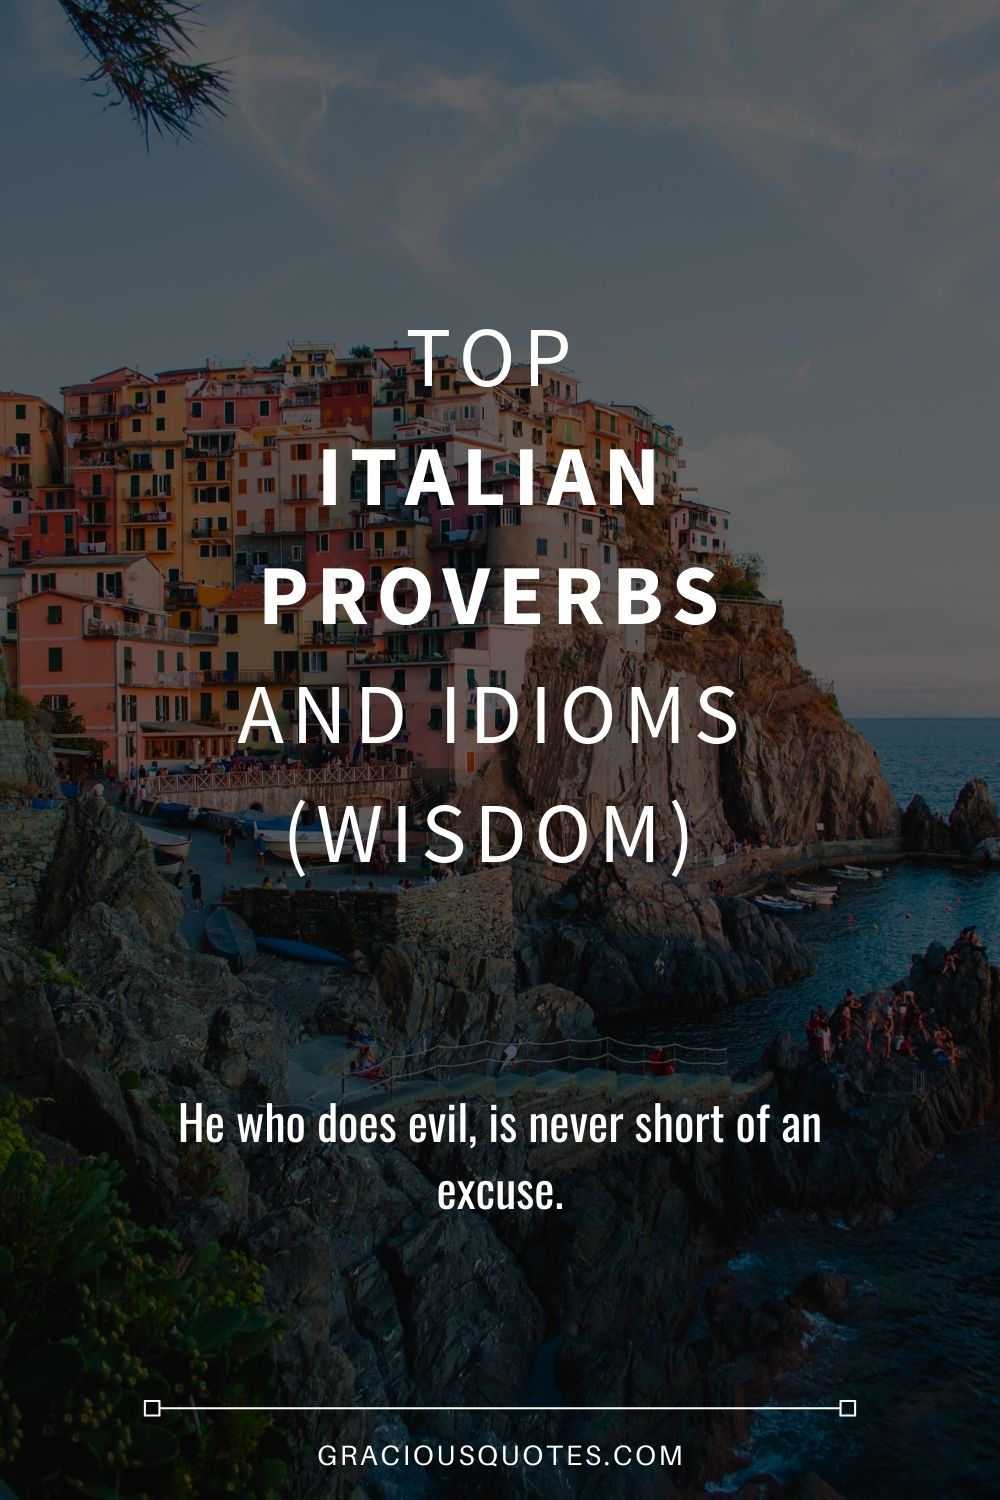 Top Italian Proverbs and Idioms (WISDOM) - Gracious Quotes